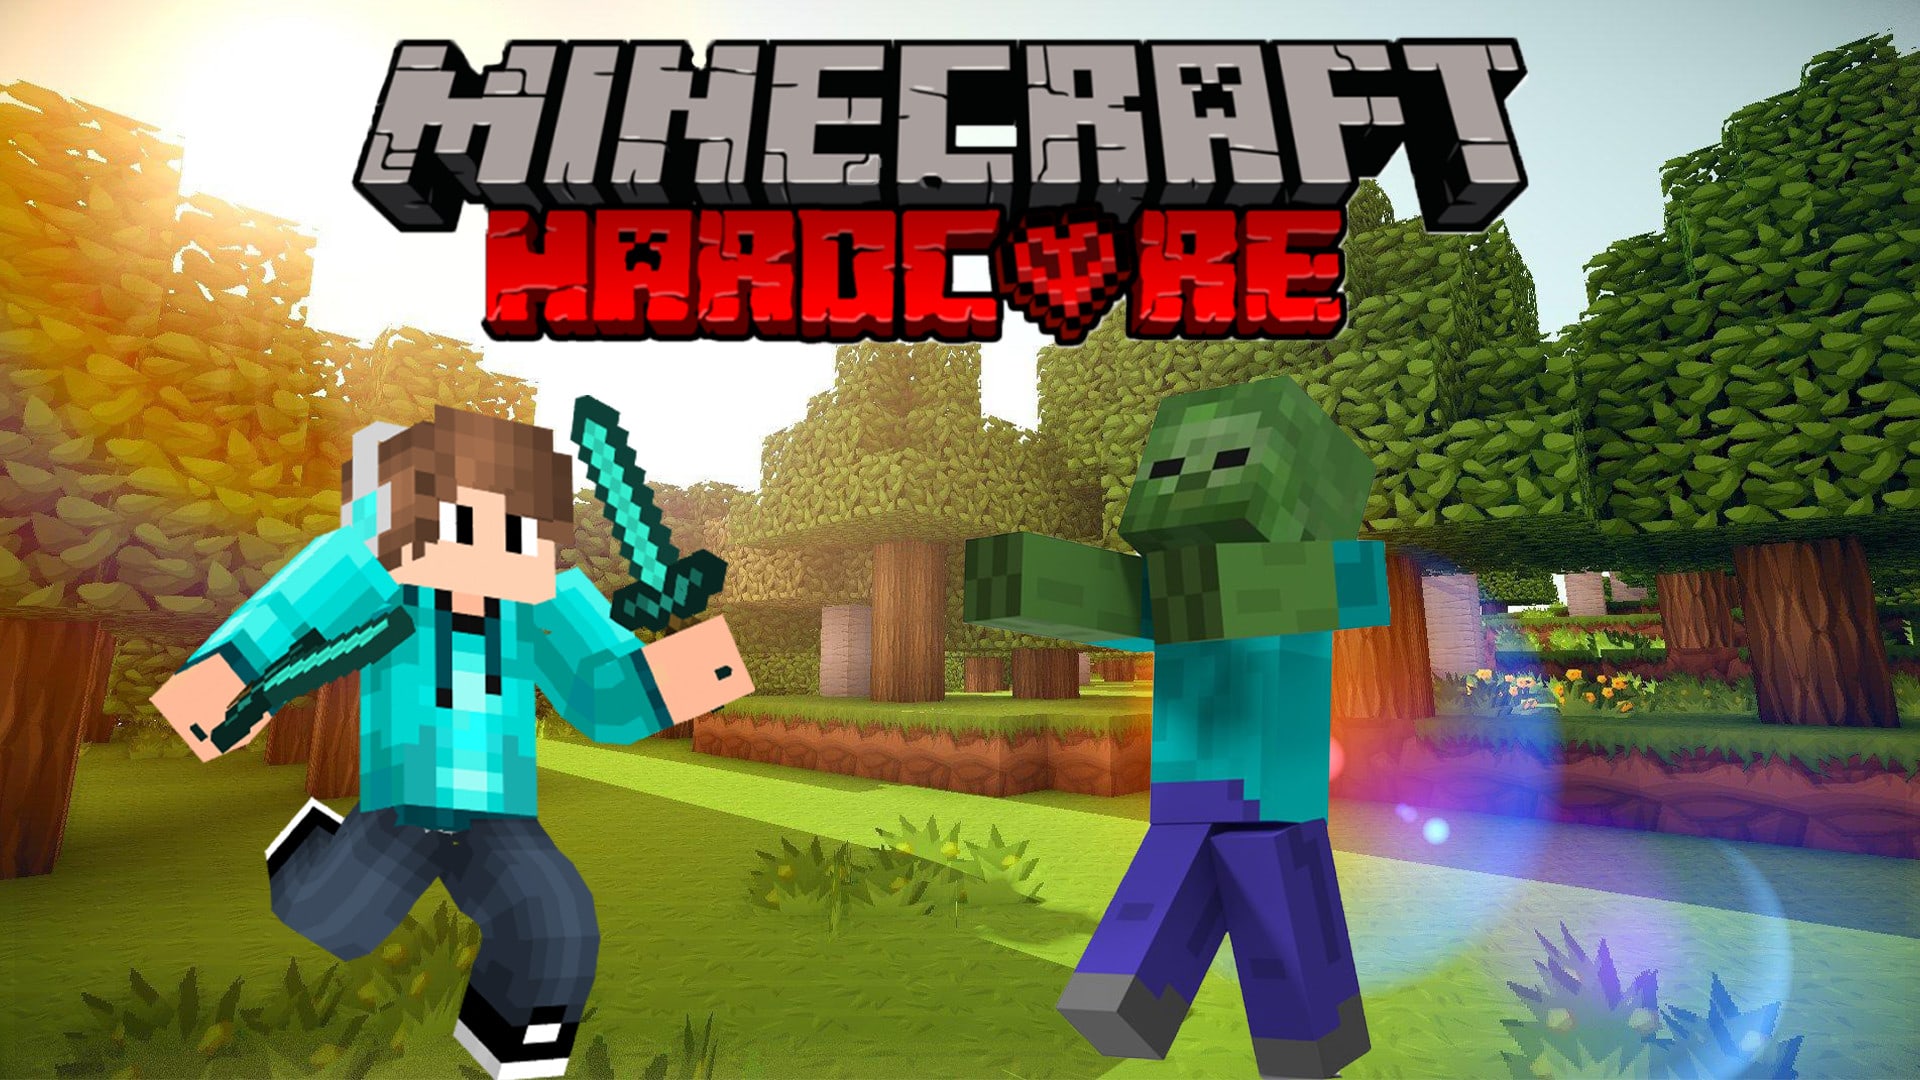 Create 2 high quality thumbnails for your minecraft video by Lukasavvas |  Fiverr